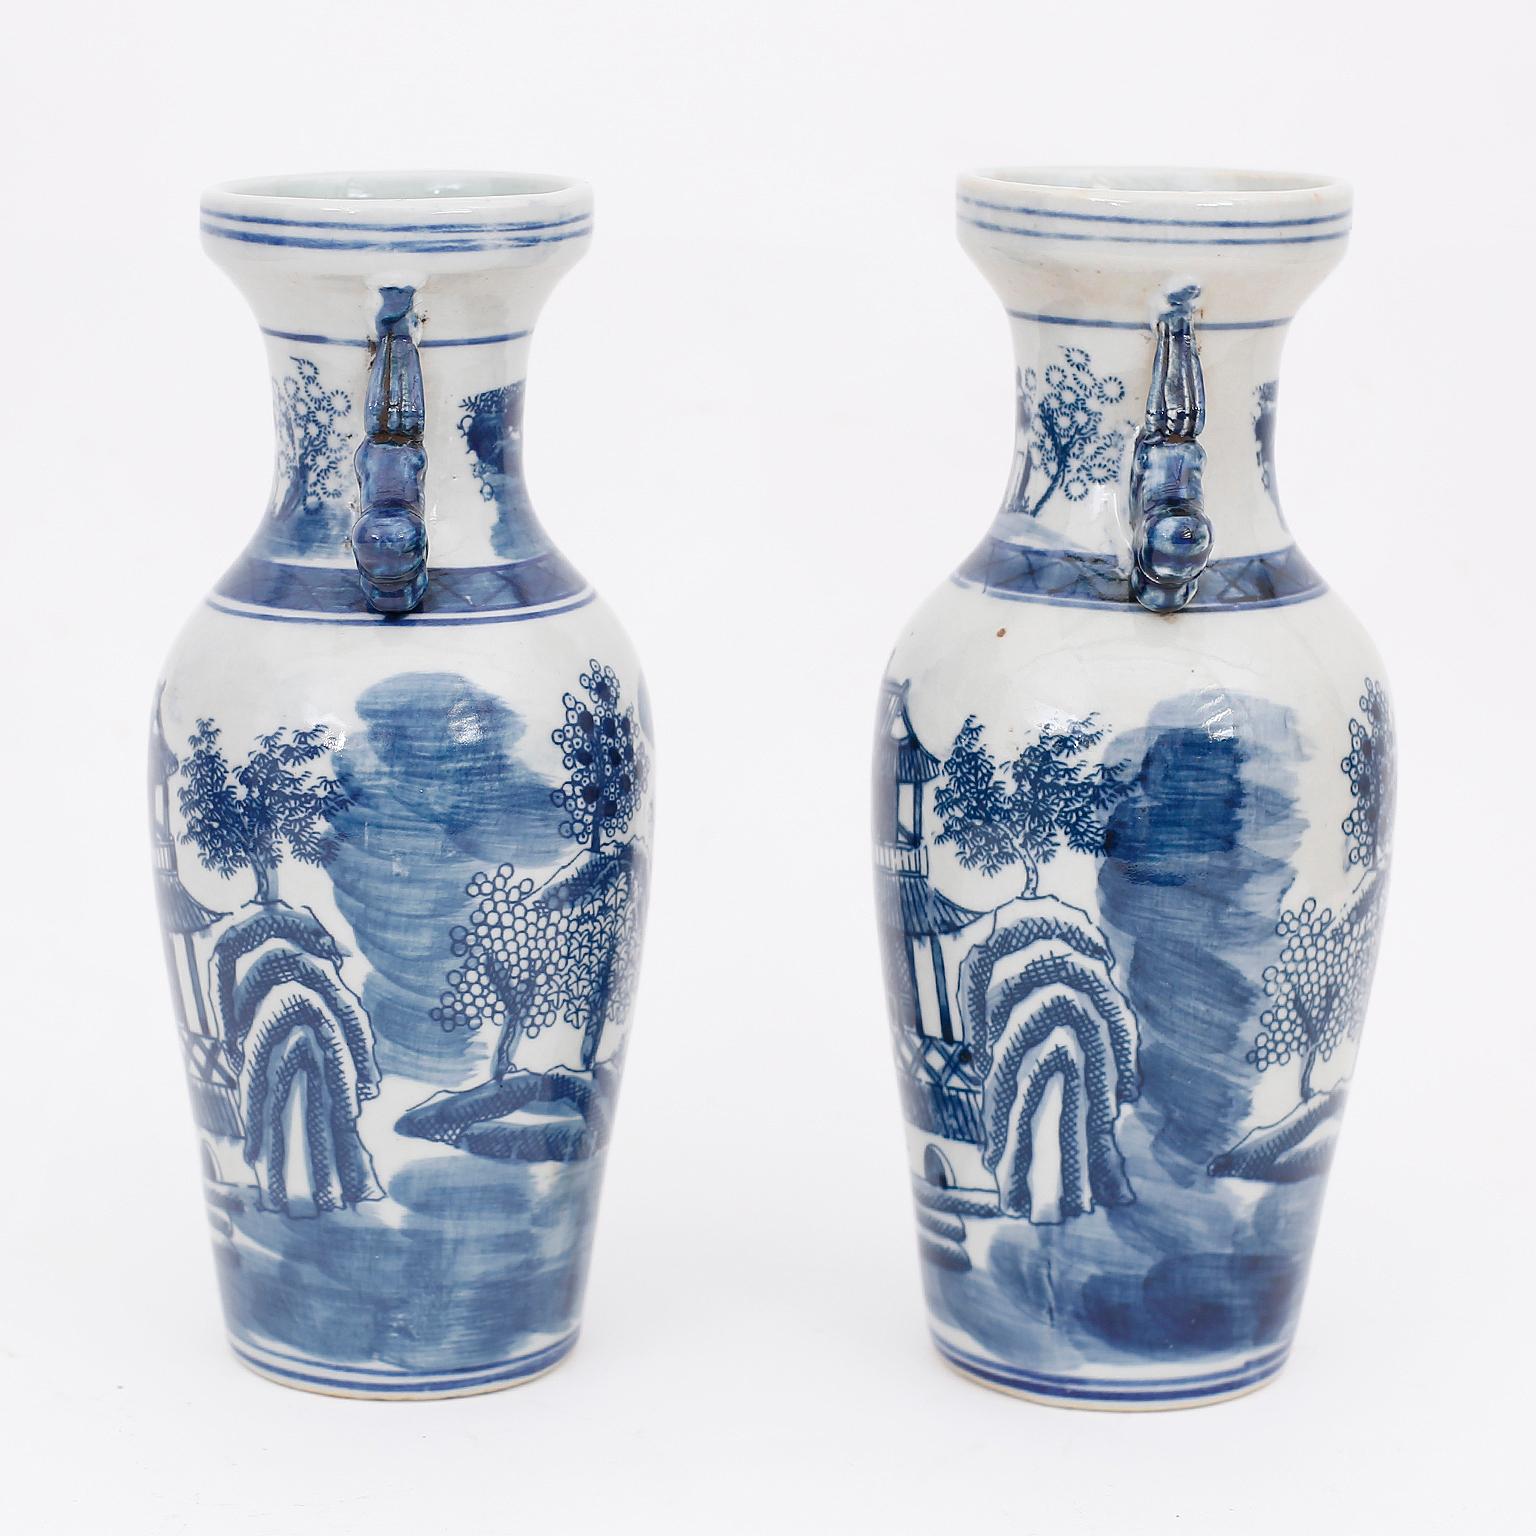 Pair of Chinese blue and white porcelain vases with Classic form and decorated with pagodas and landscapes, in the Chinese Export manner.